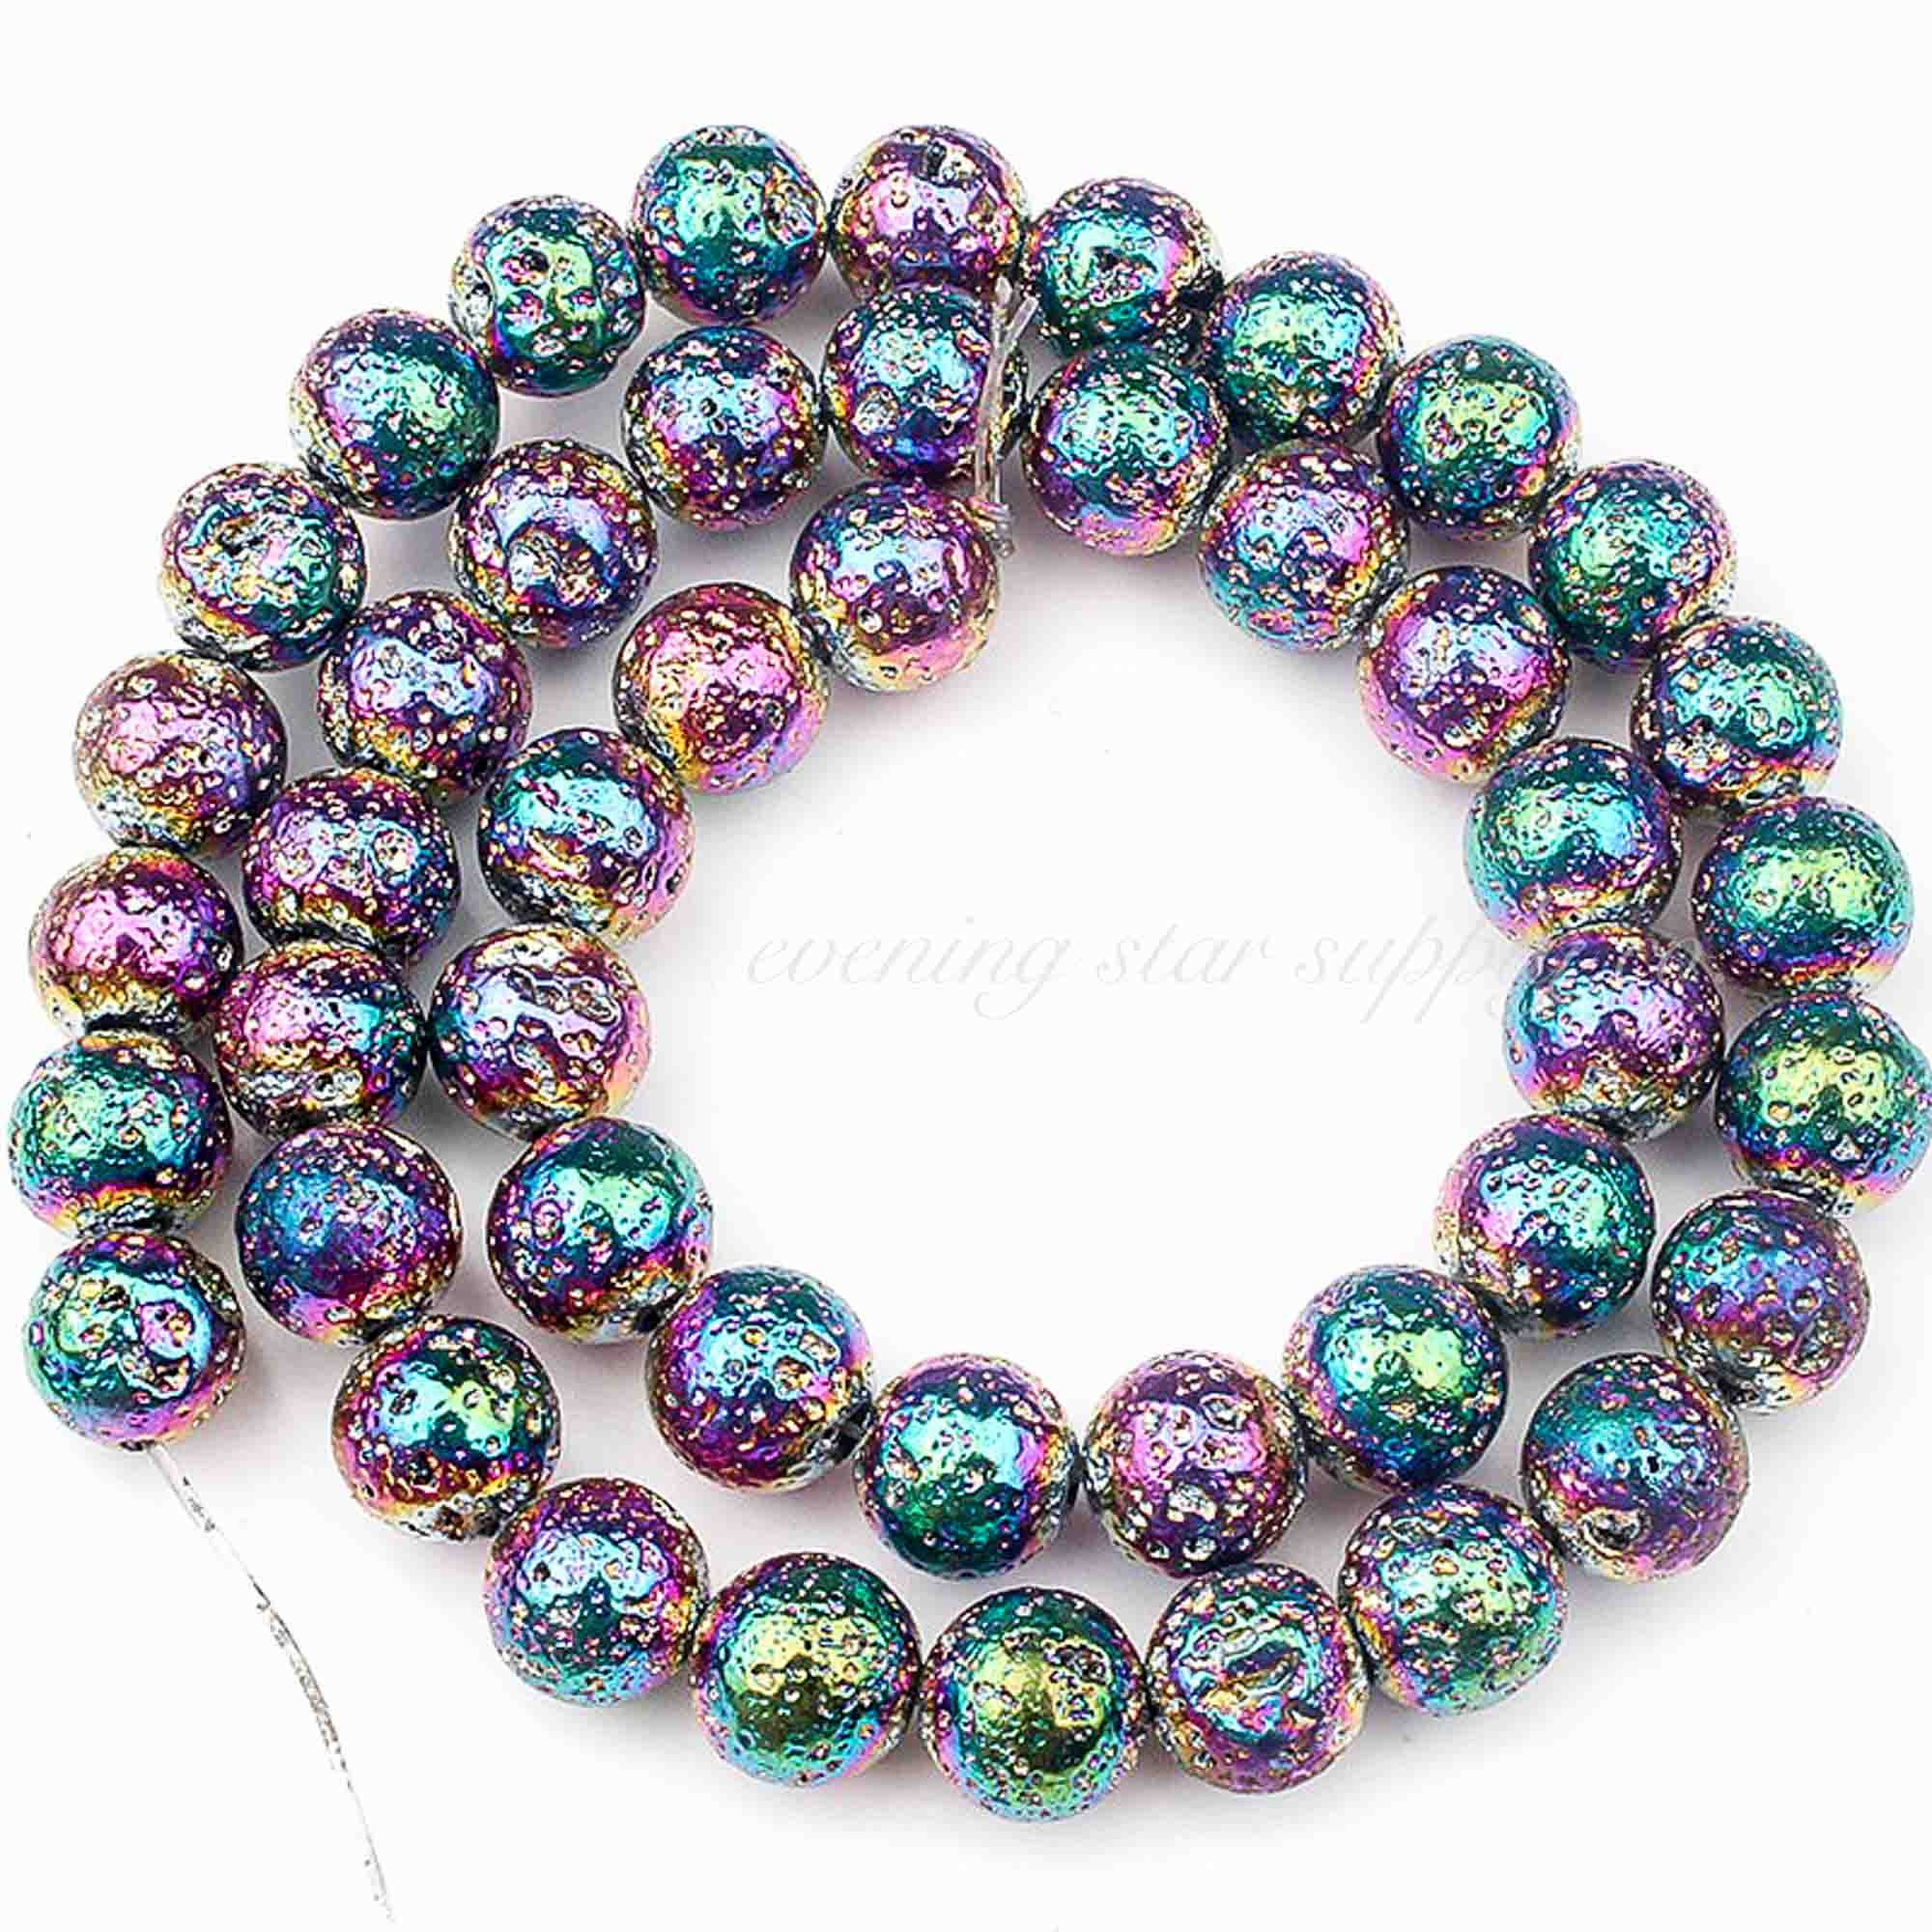 Multicolor Round Plated Lava Rock Volcanic Stone Beads For Jewelry Making 15"DIY 